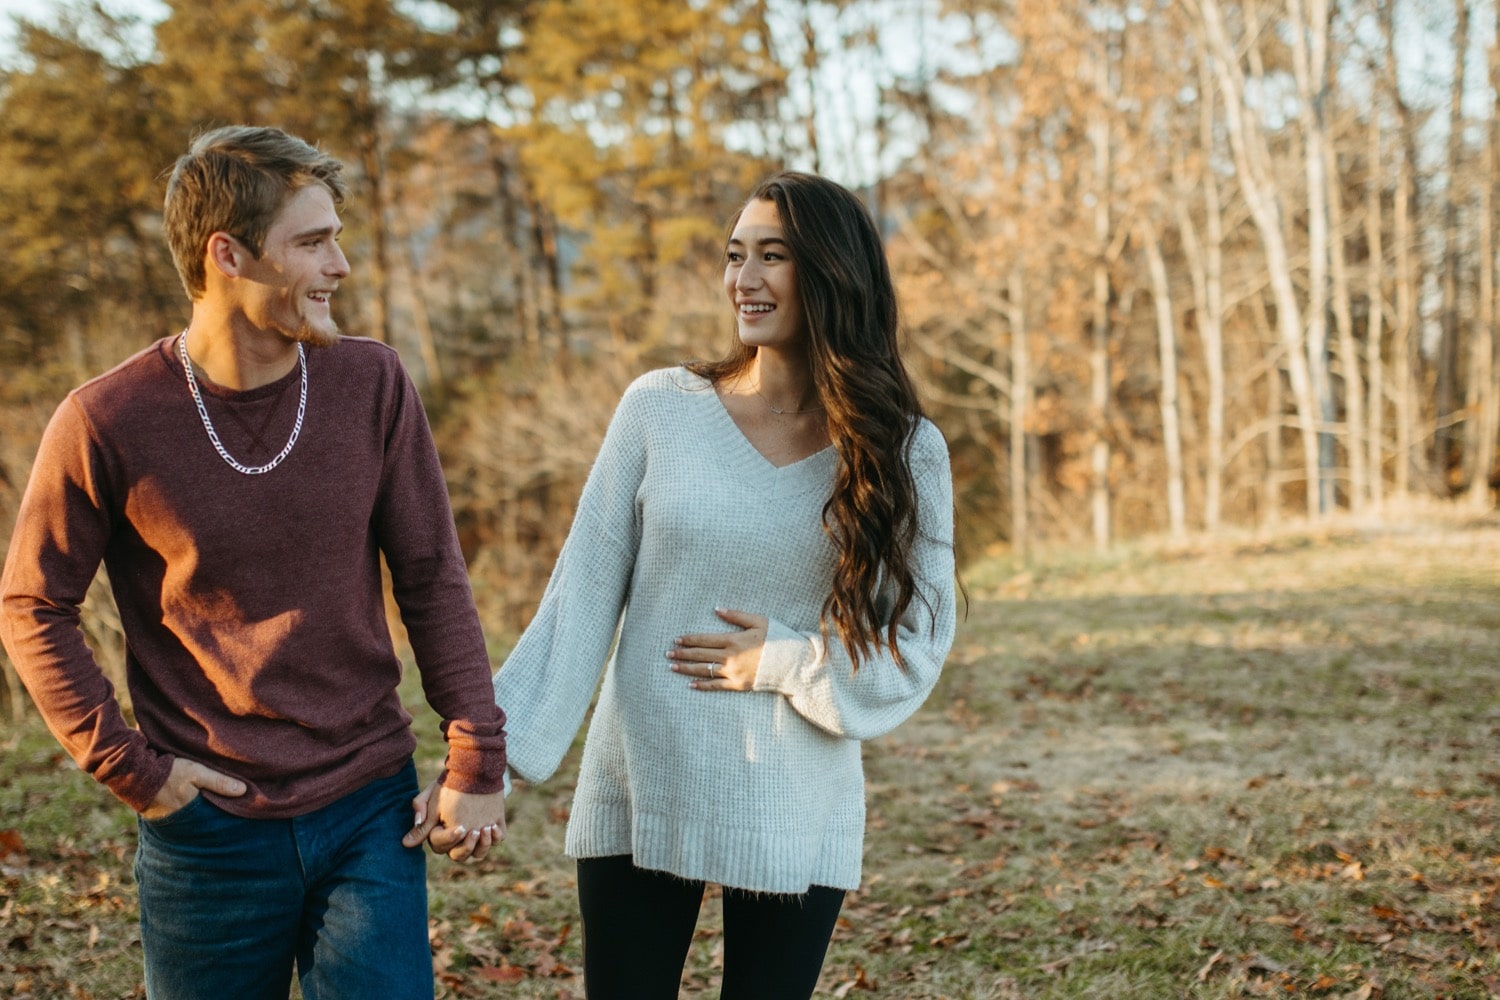 Surprise Proposal In The Foothills Parkway Smoky Mountain Photographer